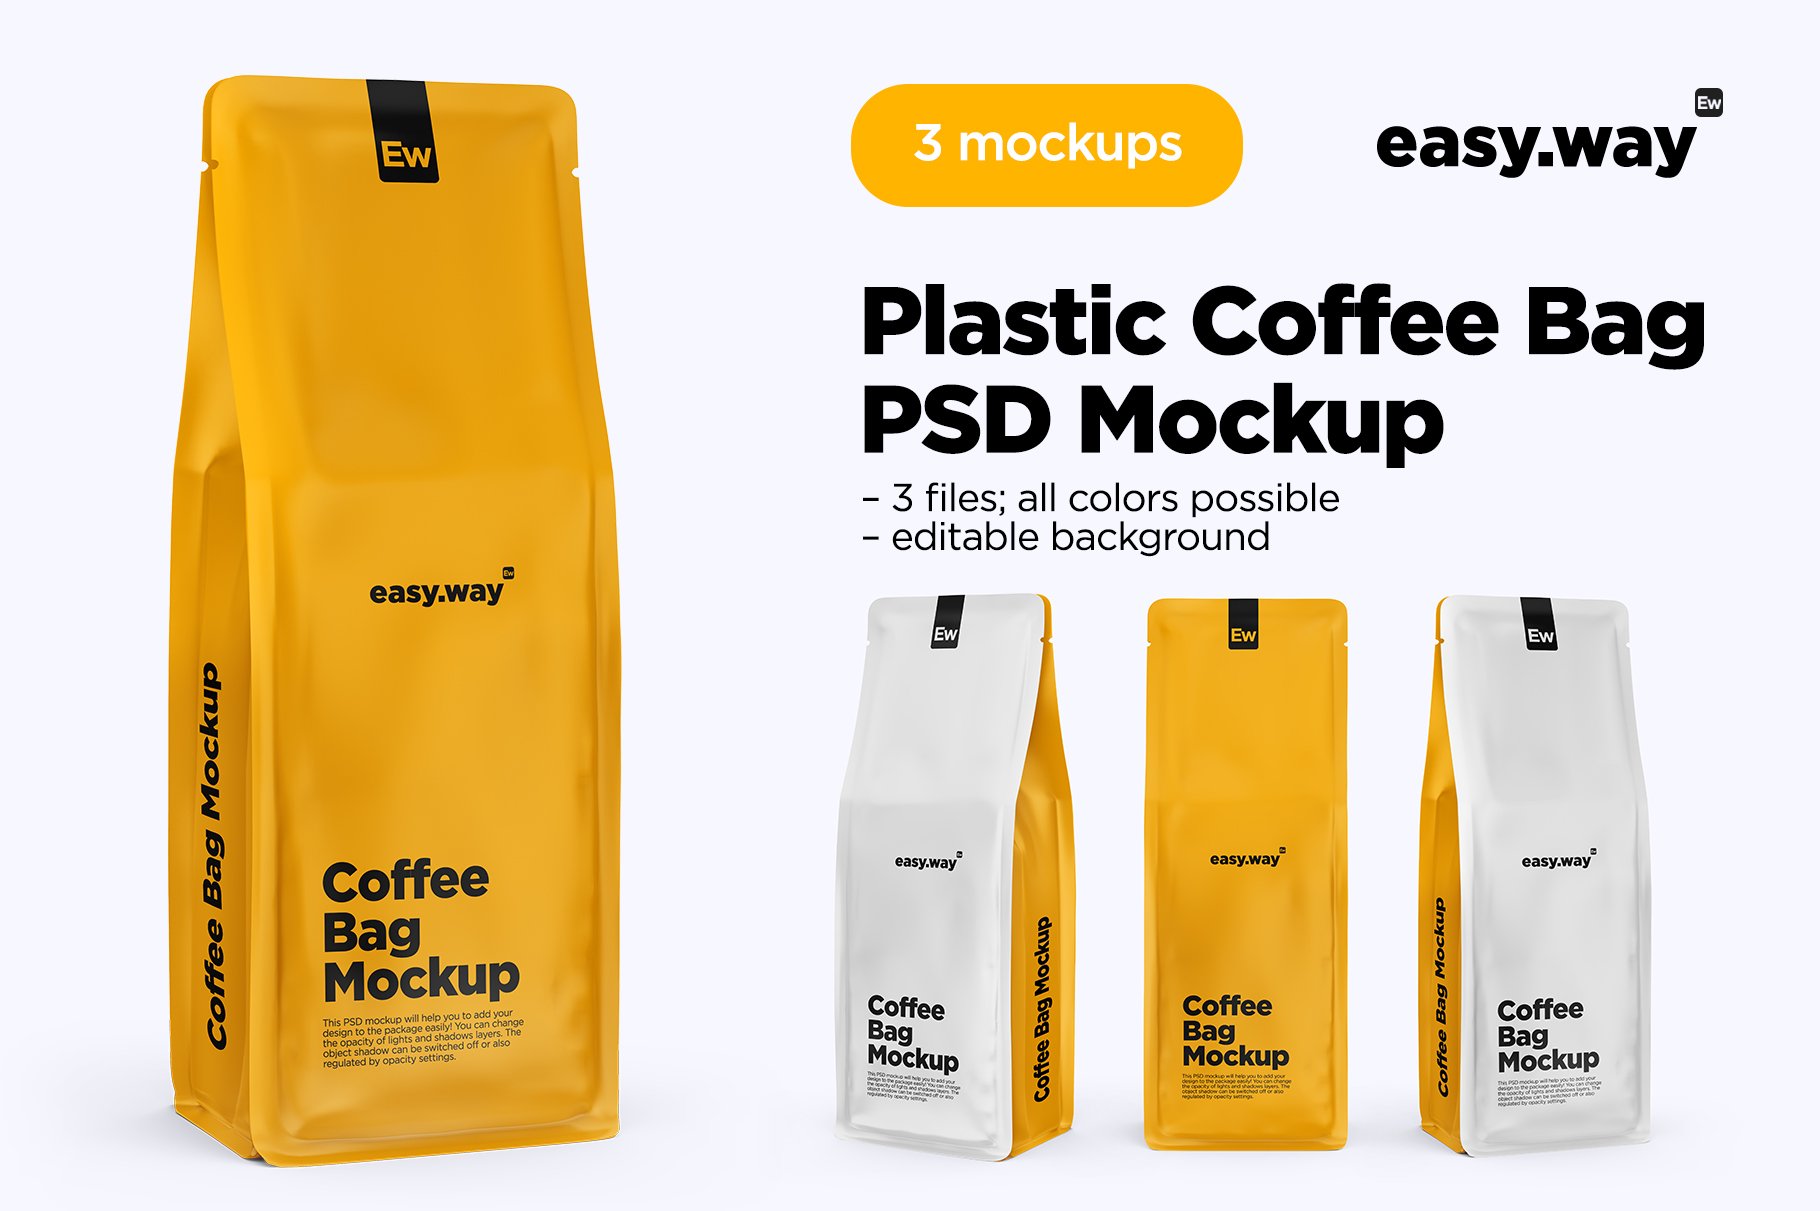 Coffee Bags PSD Mockups cover image.